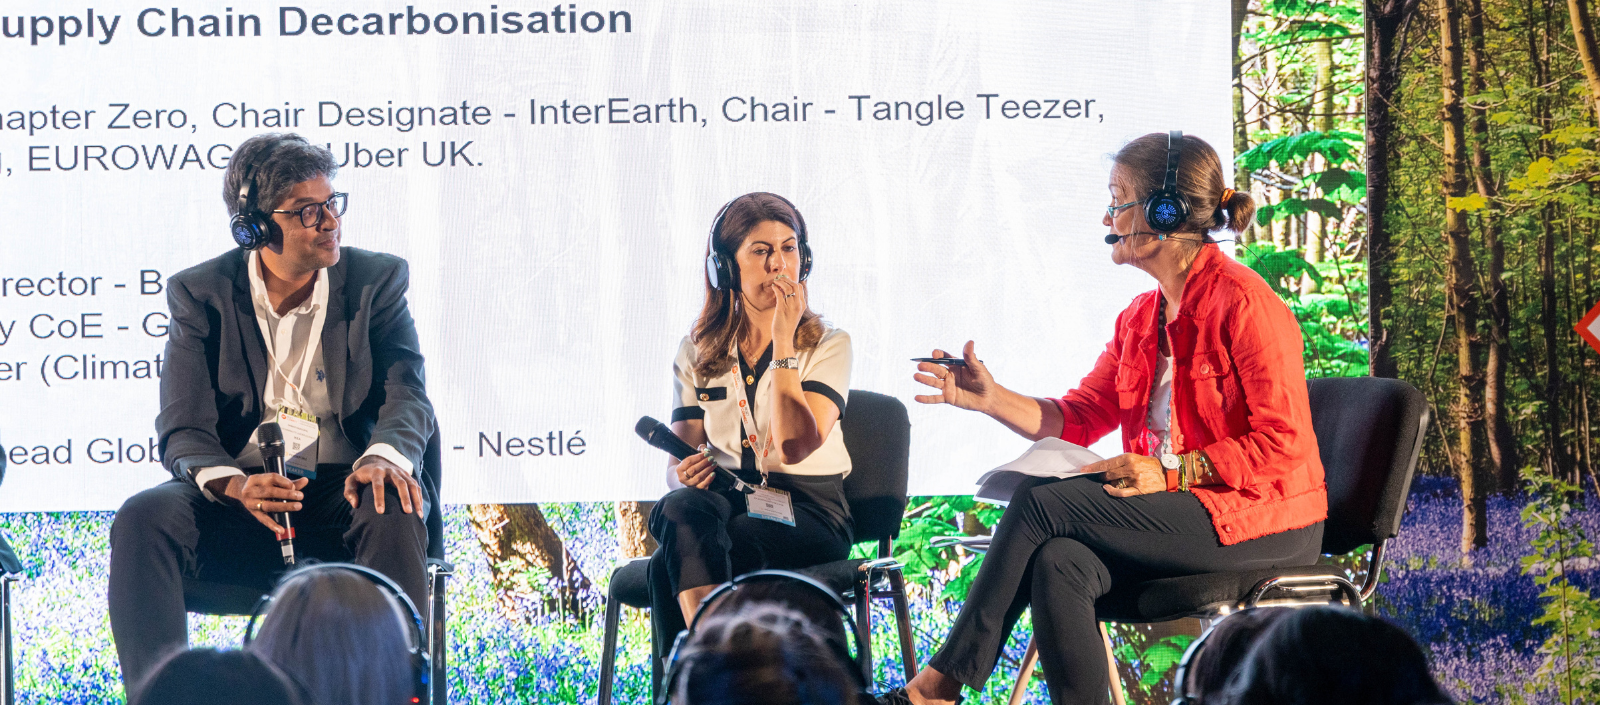 Reset Connect, The sustainability and net-zero event for business, investors and innovators